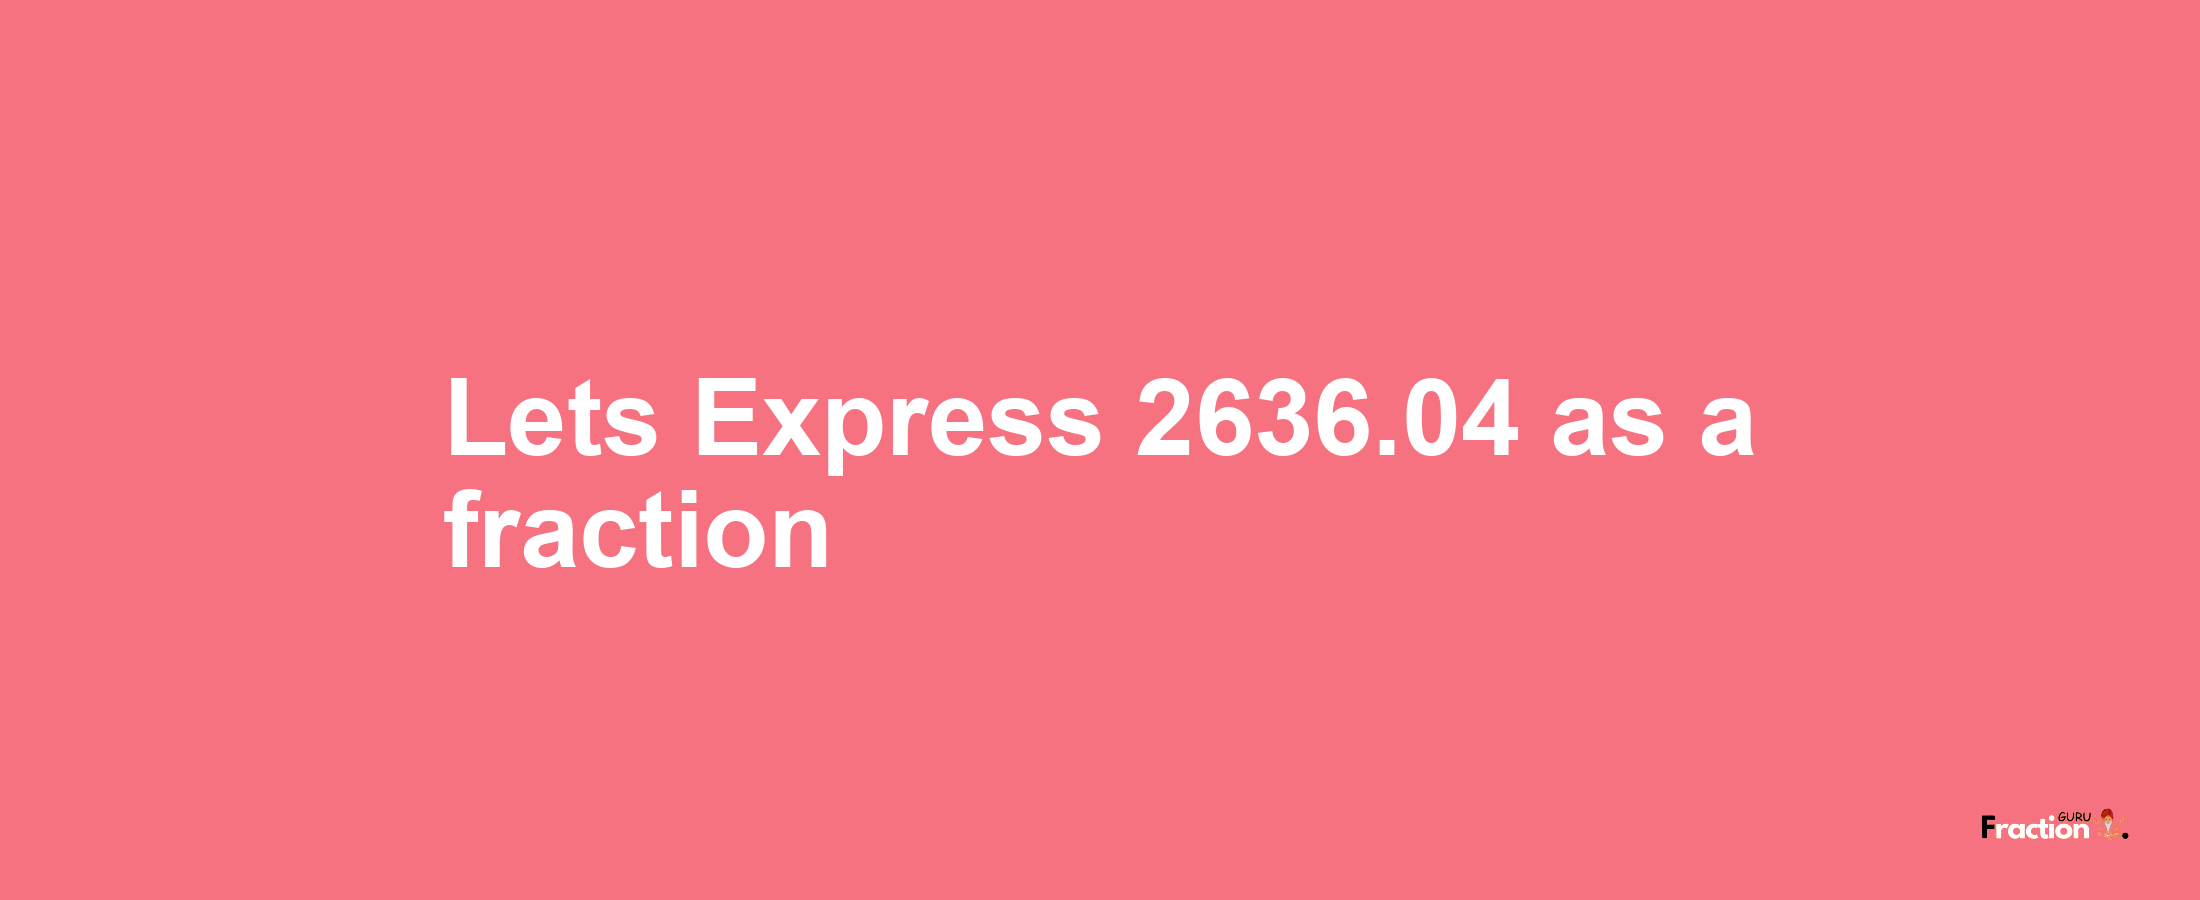 Lets Express 2636.04 as afraction